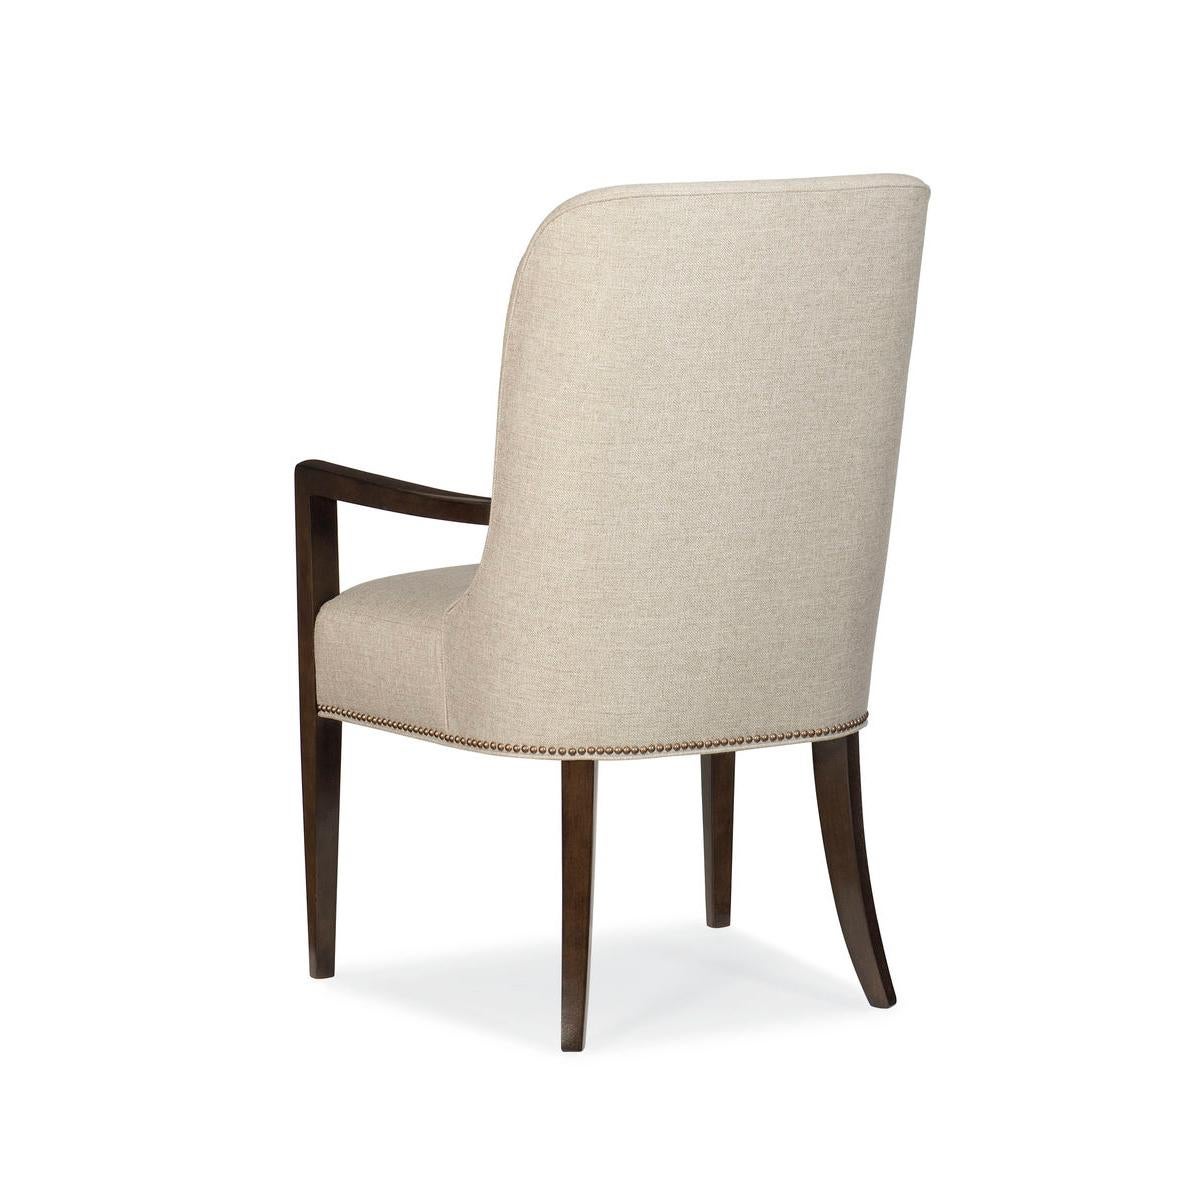 Clean, classic lines, fully upholstered in a neutral brushed fabric, its open, squared-off arms and tapered sabre legs are finished in Bourbon Glaze. With its band of brass nails at the base, these chairs pair well with modern and transitional